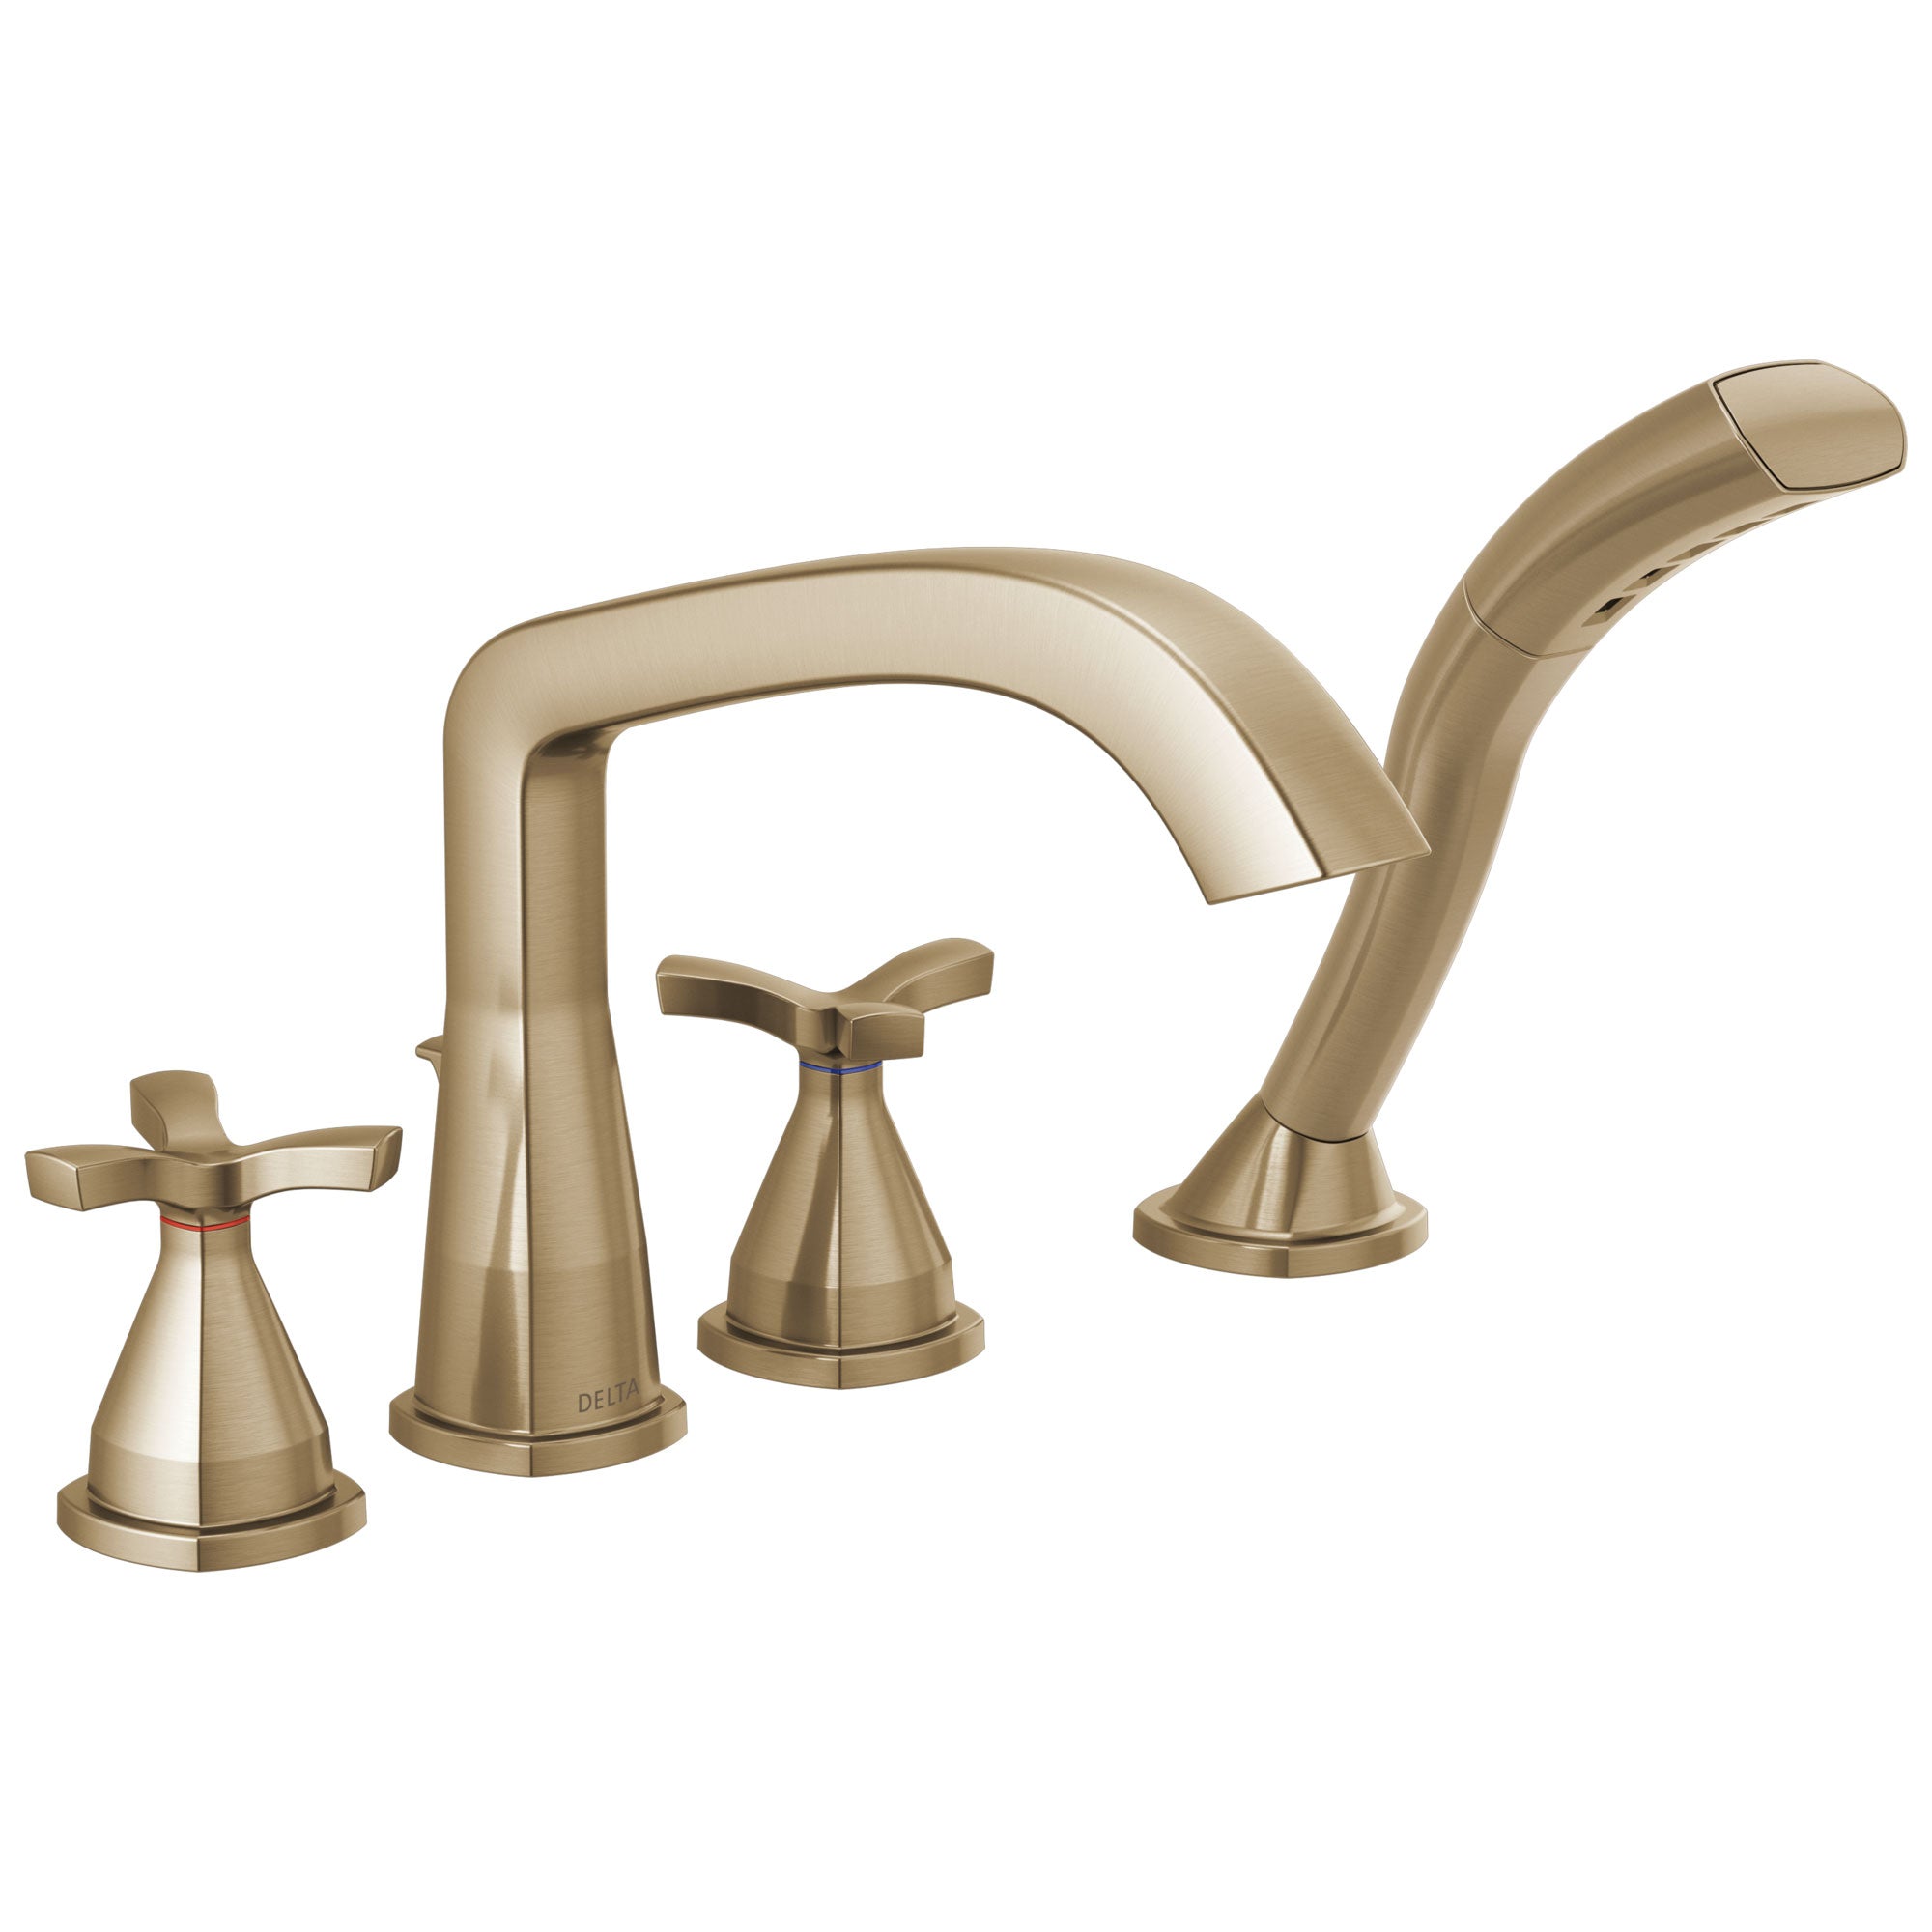 Delta Stryke Champagne Bronze Finish Helo Cross Handle Deck Mount Roman Tub Filler Faucet with Hand Shower Includes Rough-in Valve D3046V